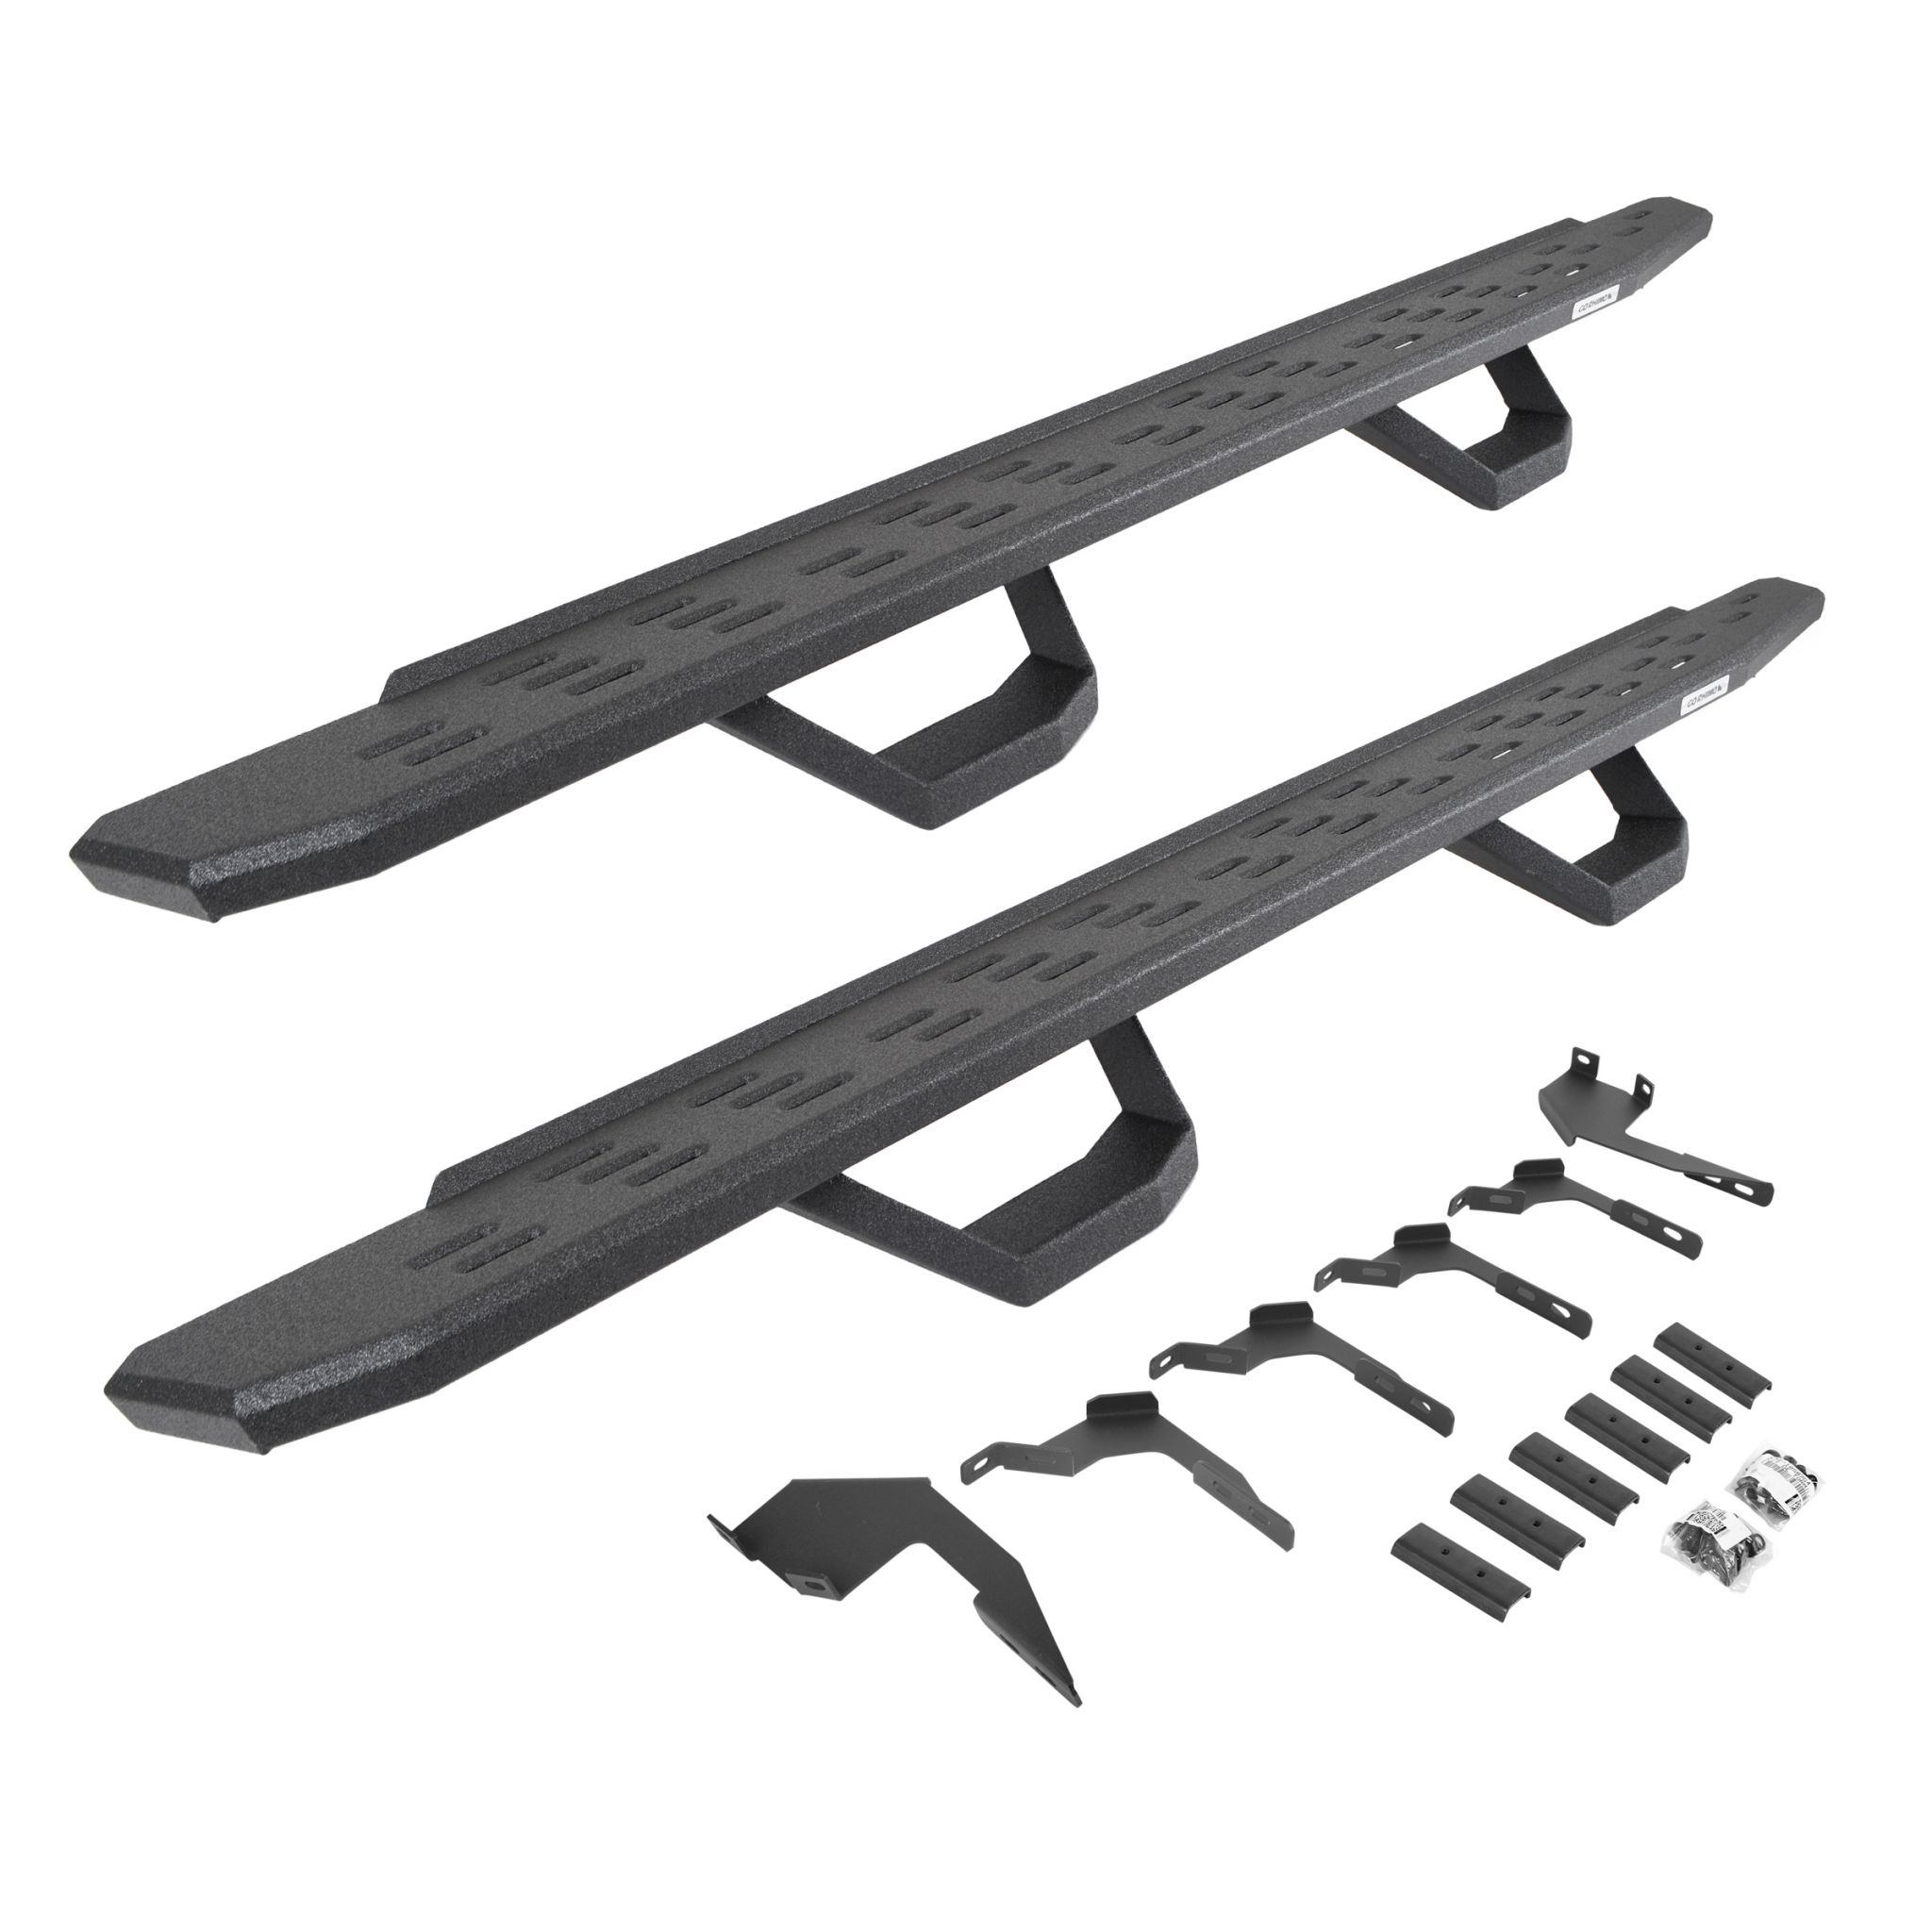 Go Rhino 6963688020T - RB30 Running Boards with Mounting Brackets & 2 Pairs of Drops Steps Kit - Protective Bedliner Coating